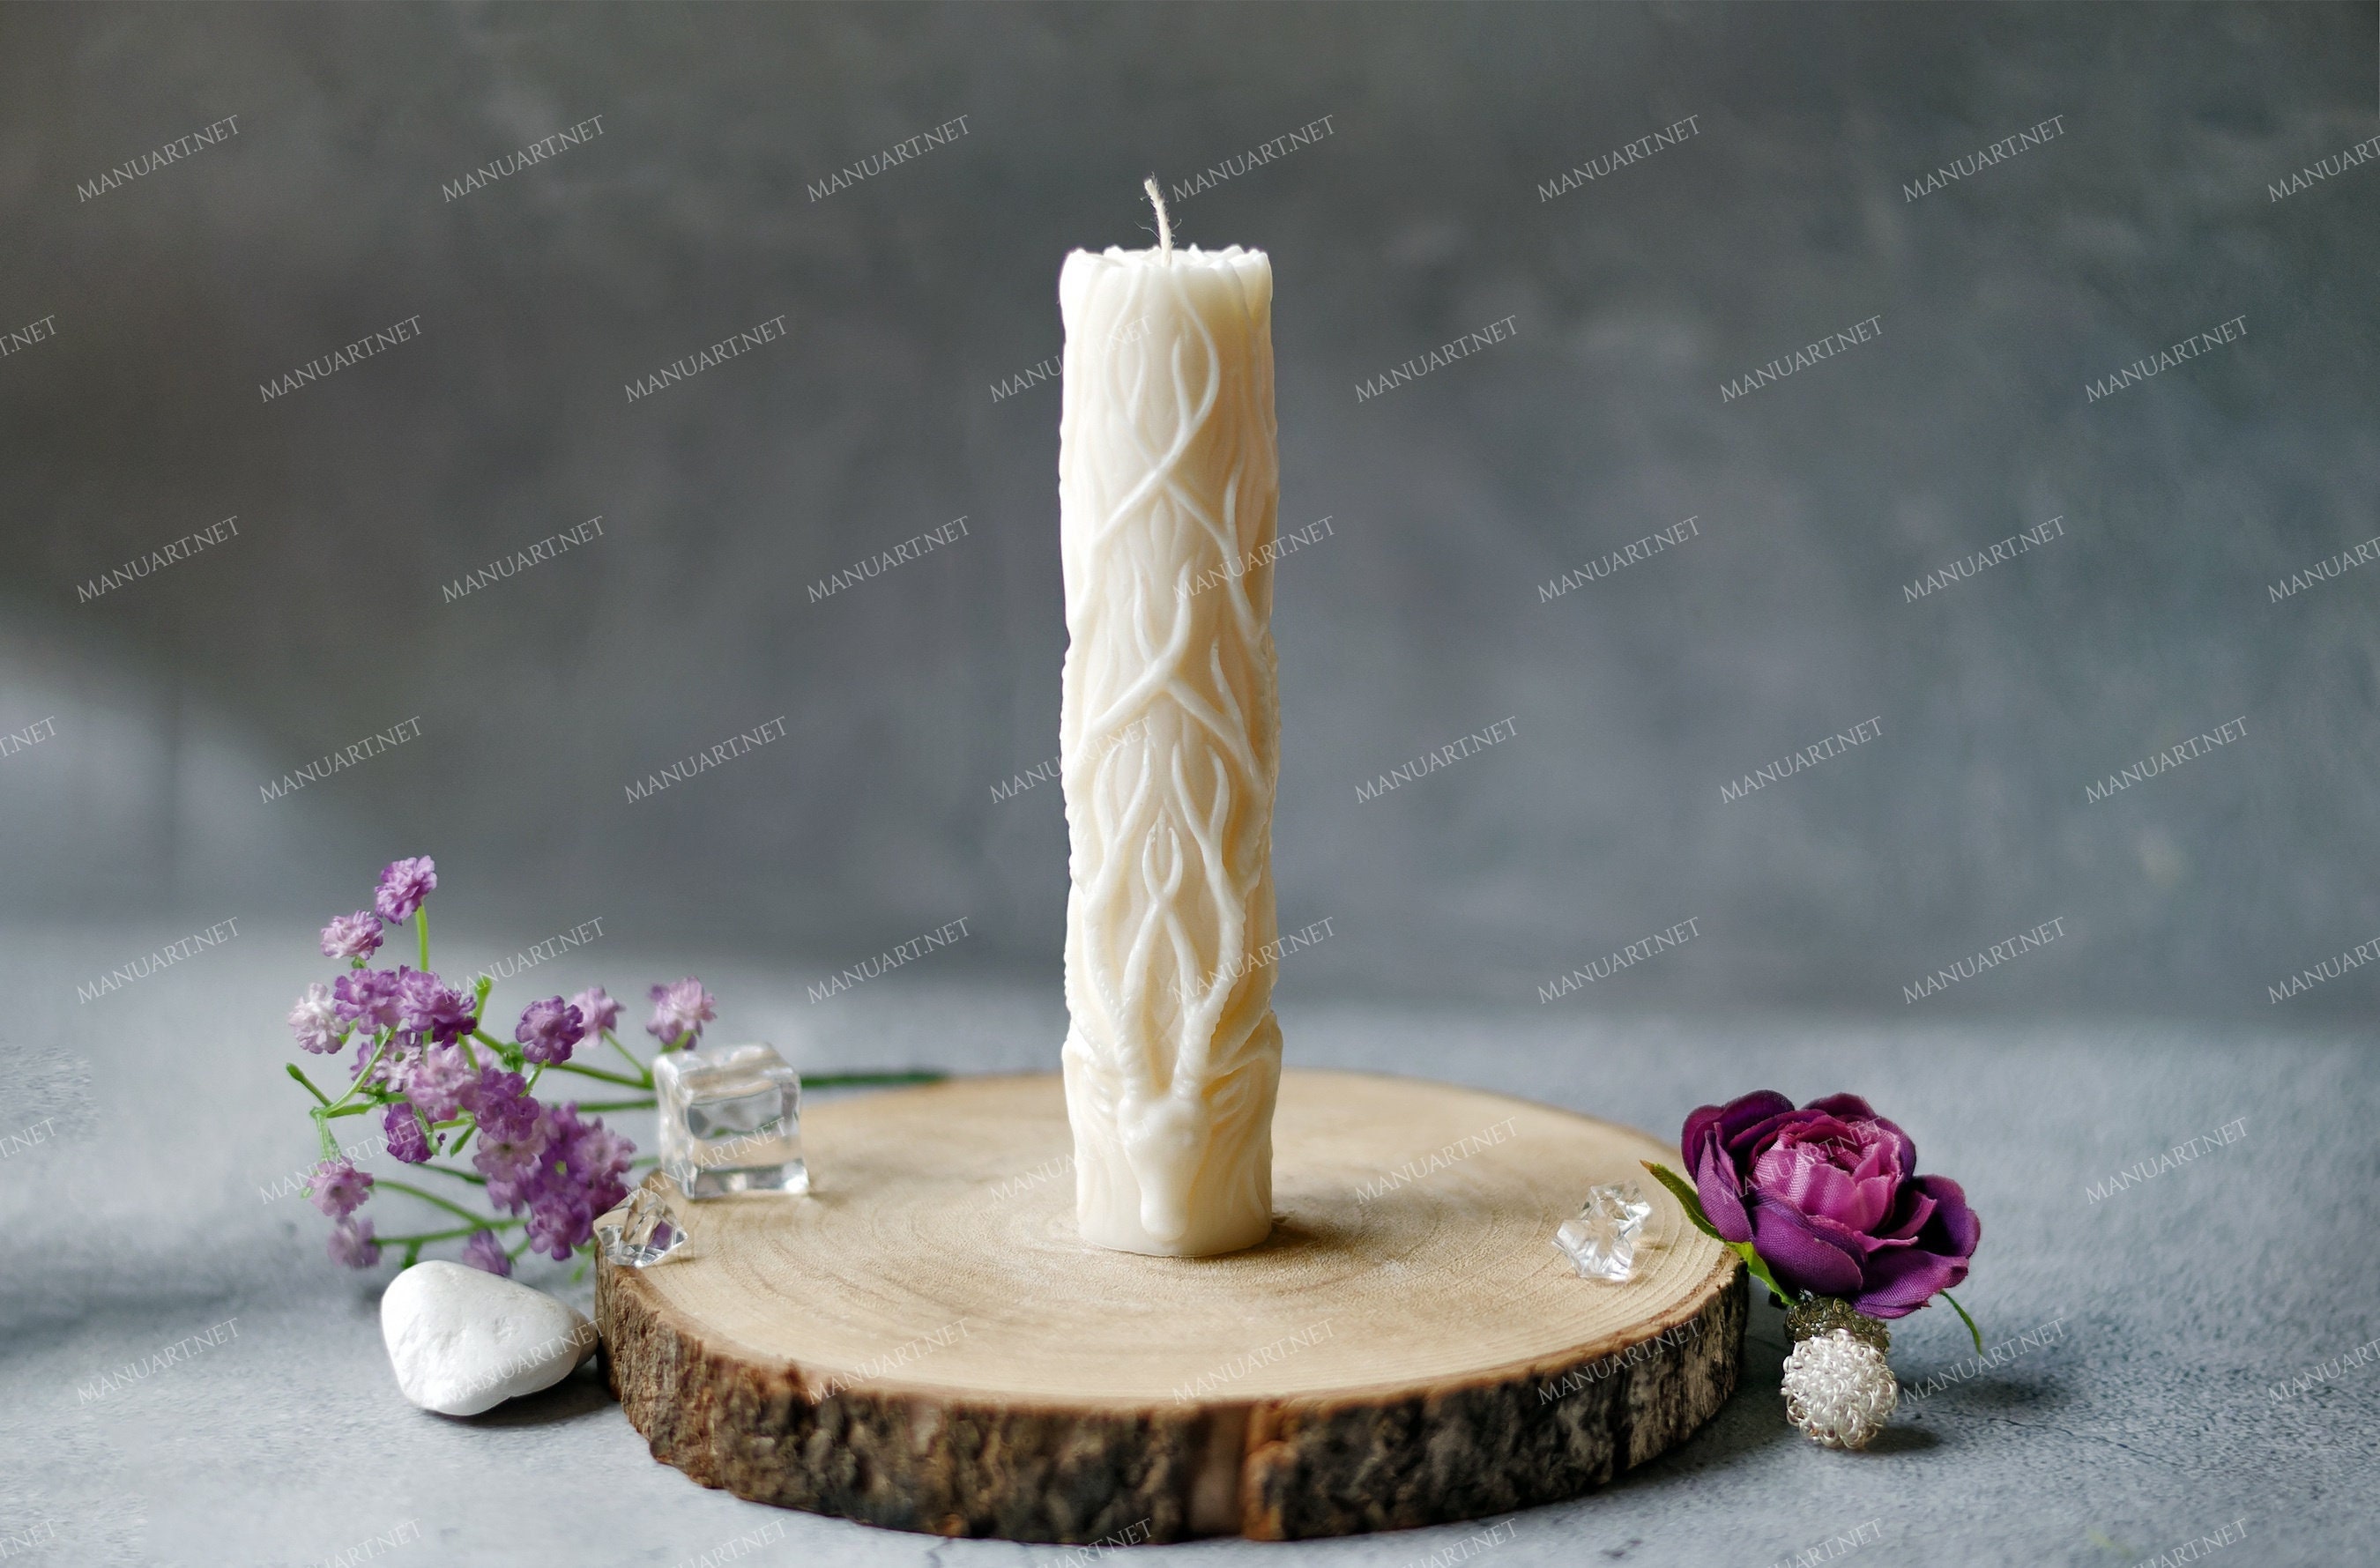 Candle Making Mold Thin Mould Long Stem Rod Acrylic DIY Candle Mould 1PC